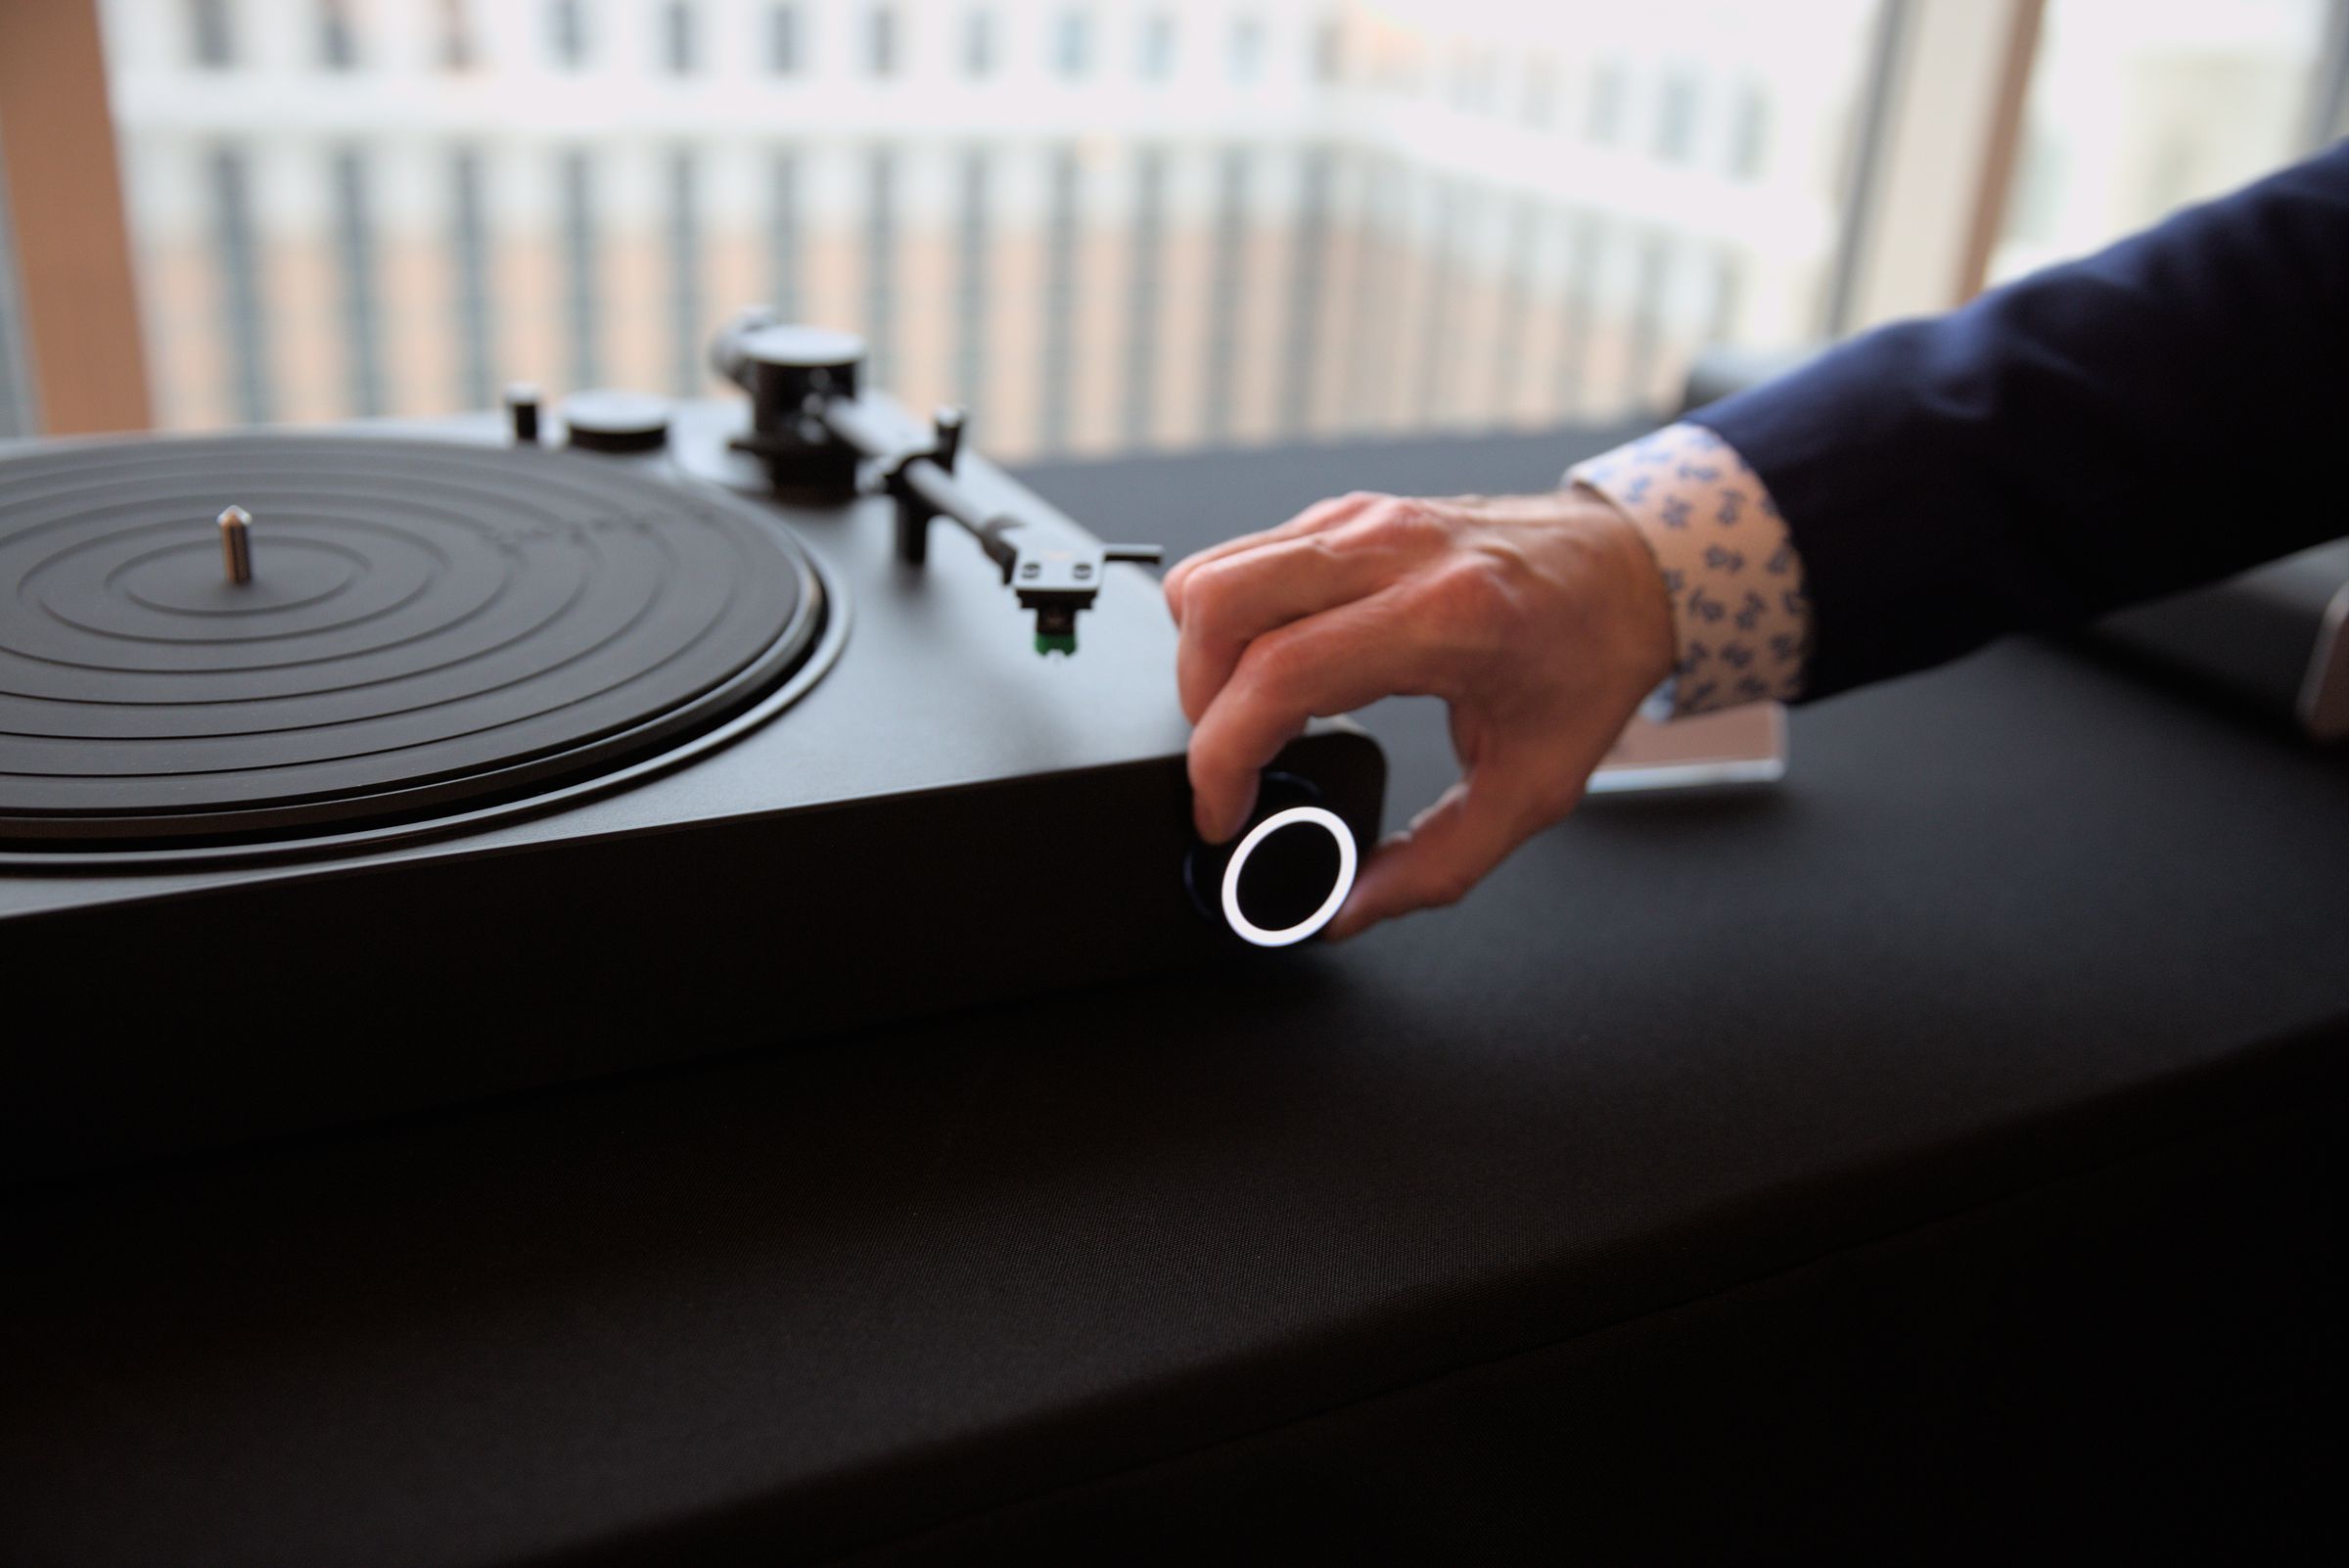 The Victrola Stream Onyx comes with a single illuminated physical knob for control.